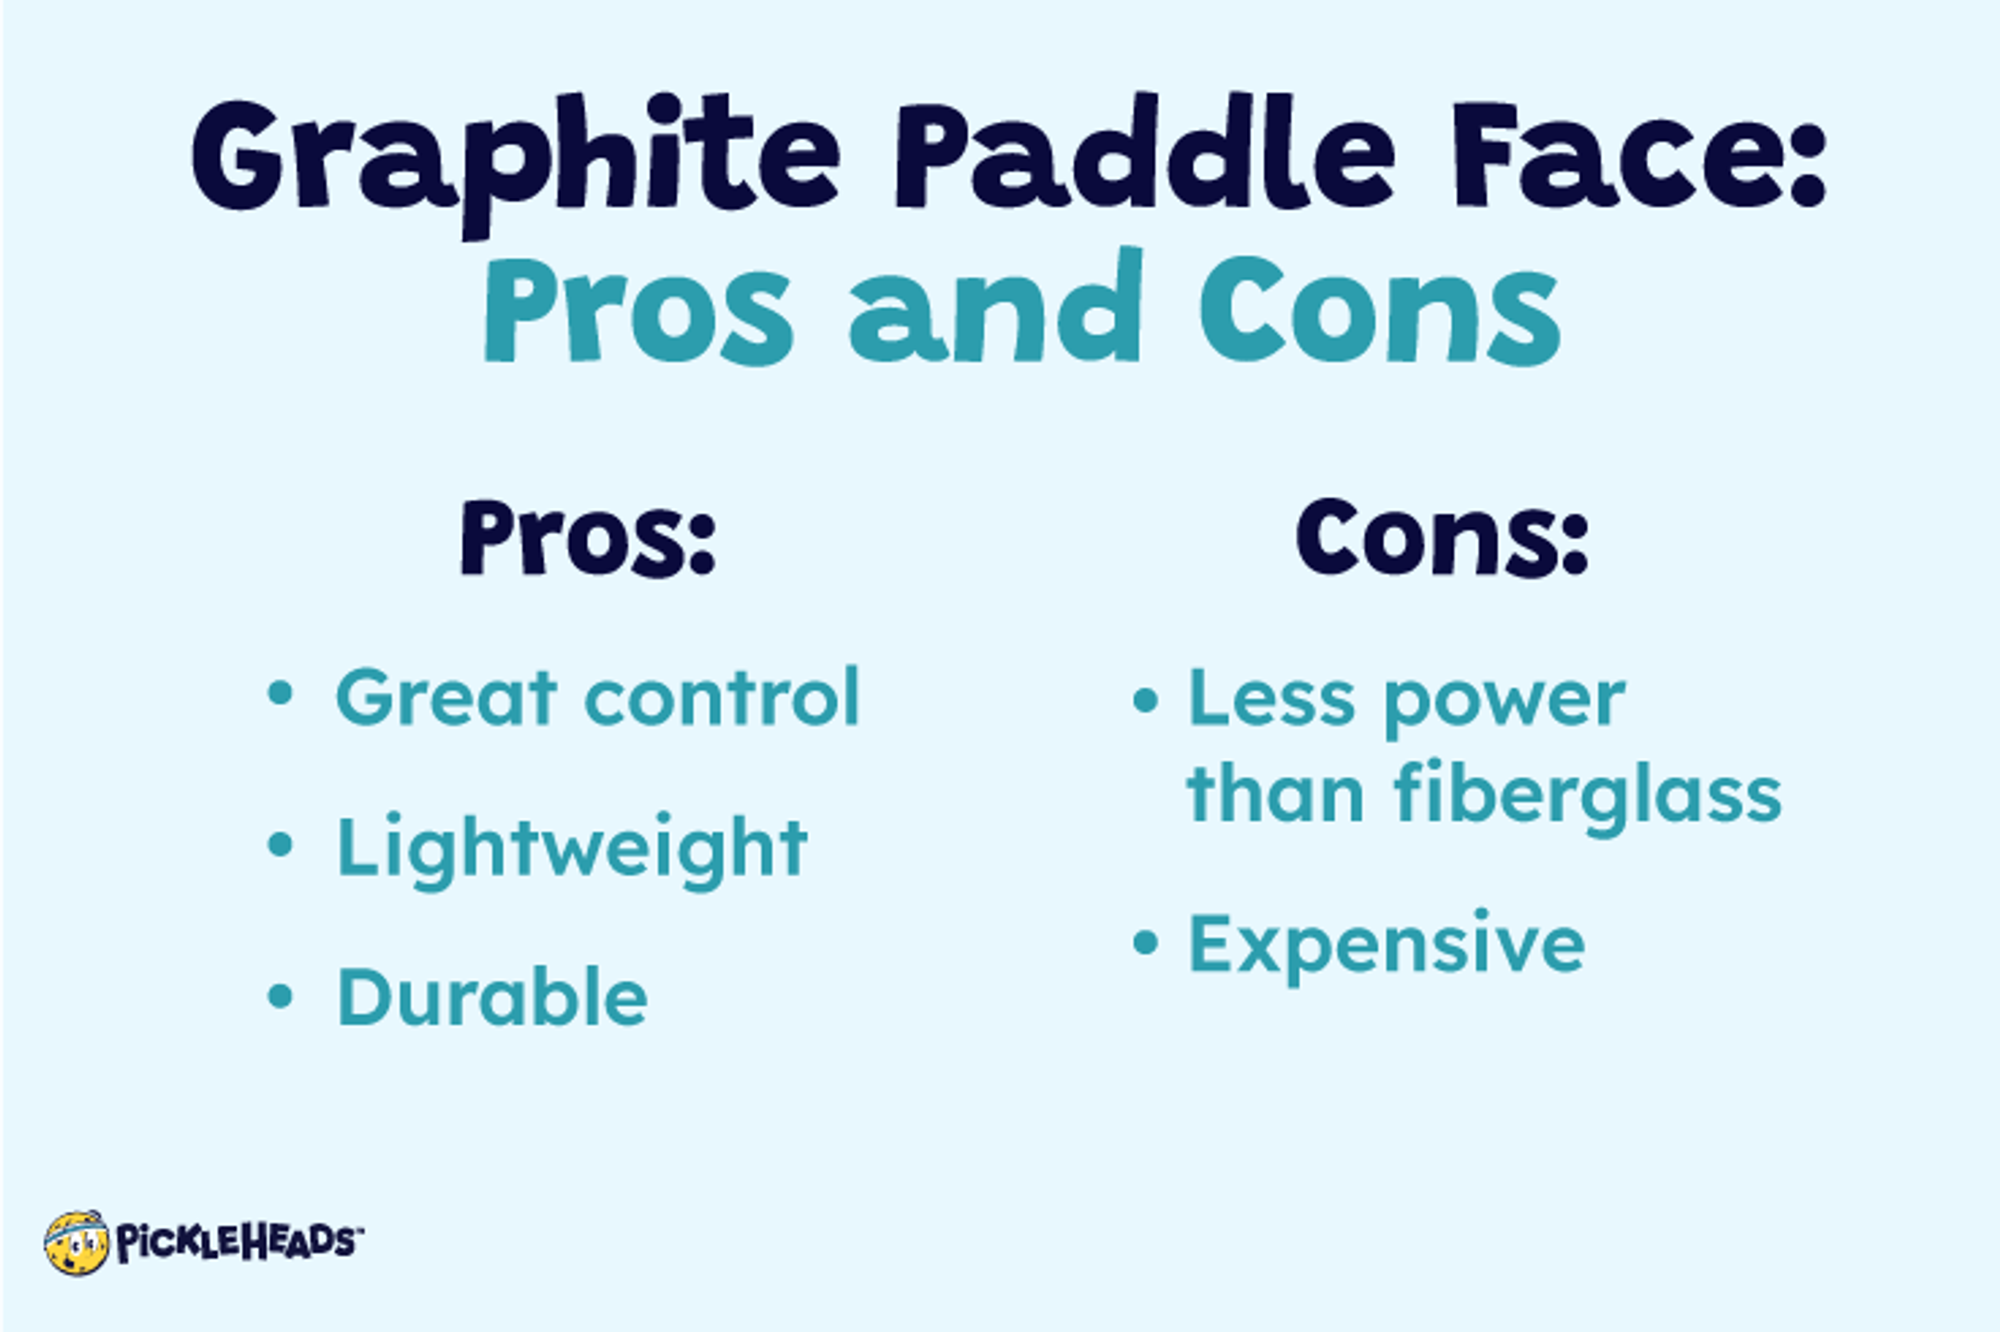 Graphite paddle face pros and cons